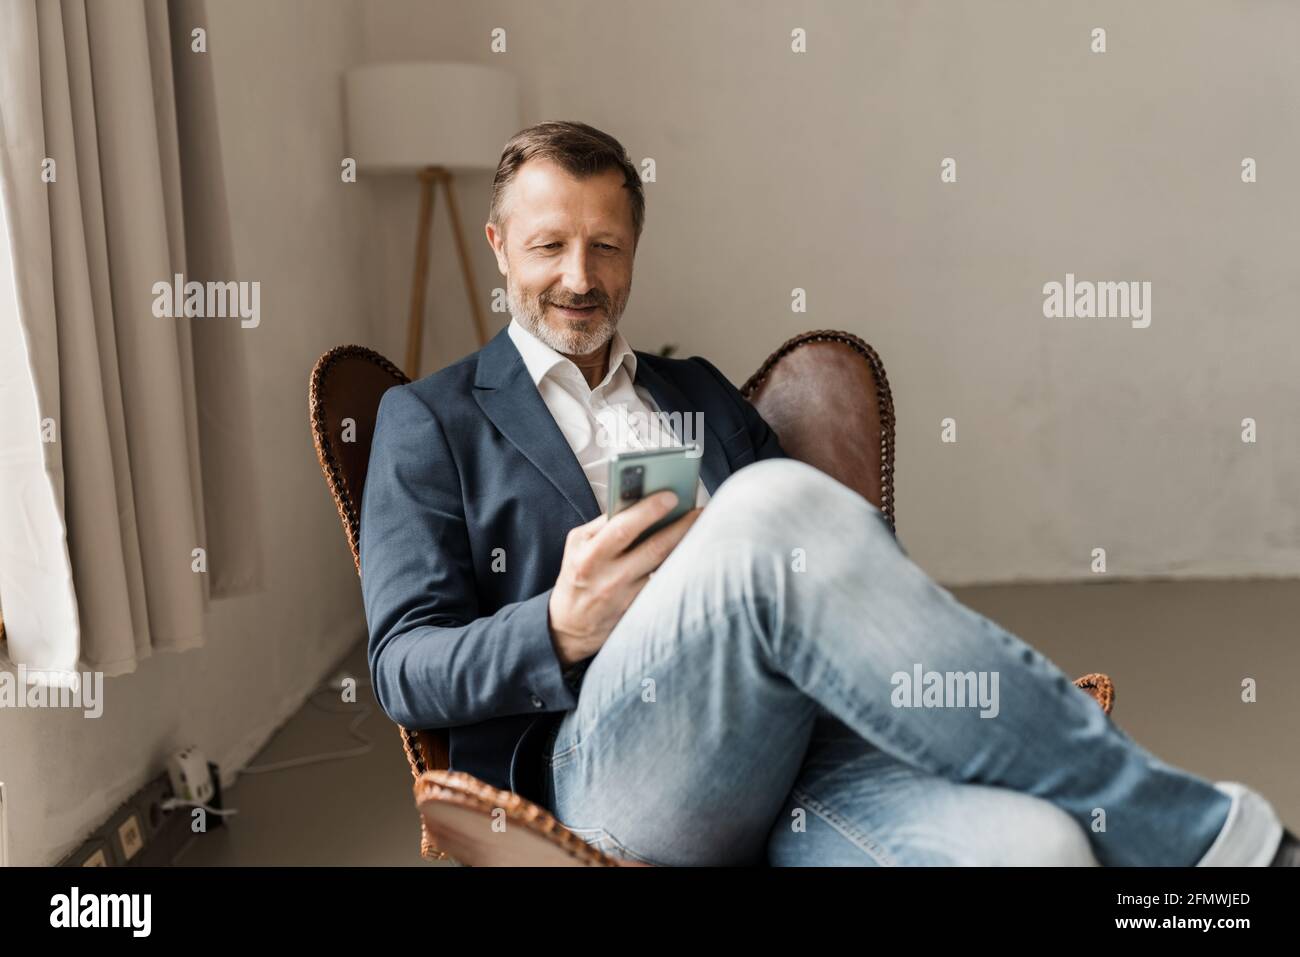 Modern trendy businessman relaxing in a leather chair reading a message or watching media on his mobile phone with a quiet smile Stock Photo